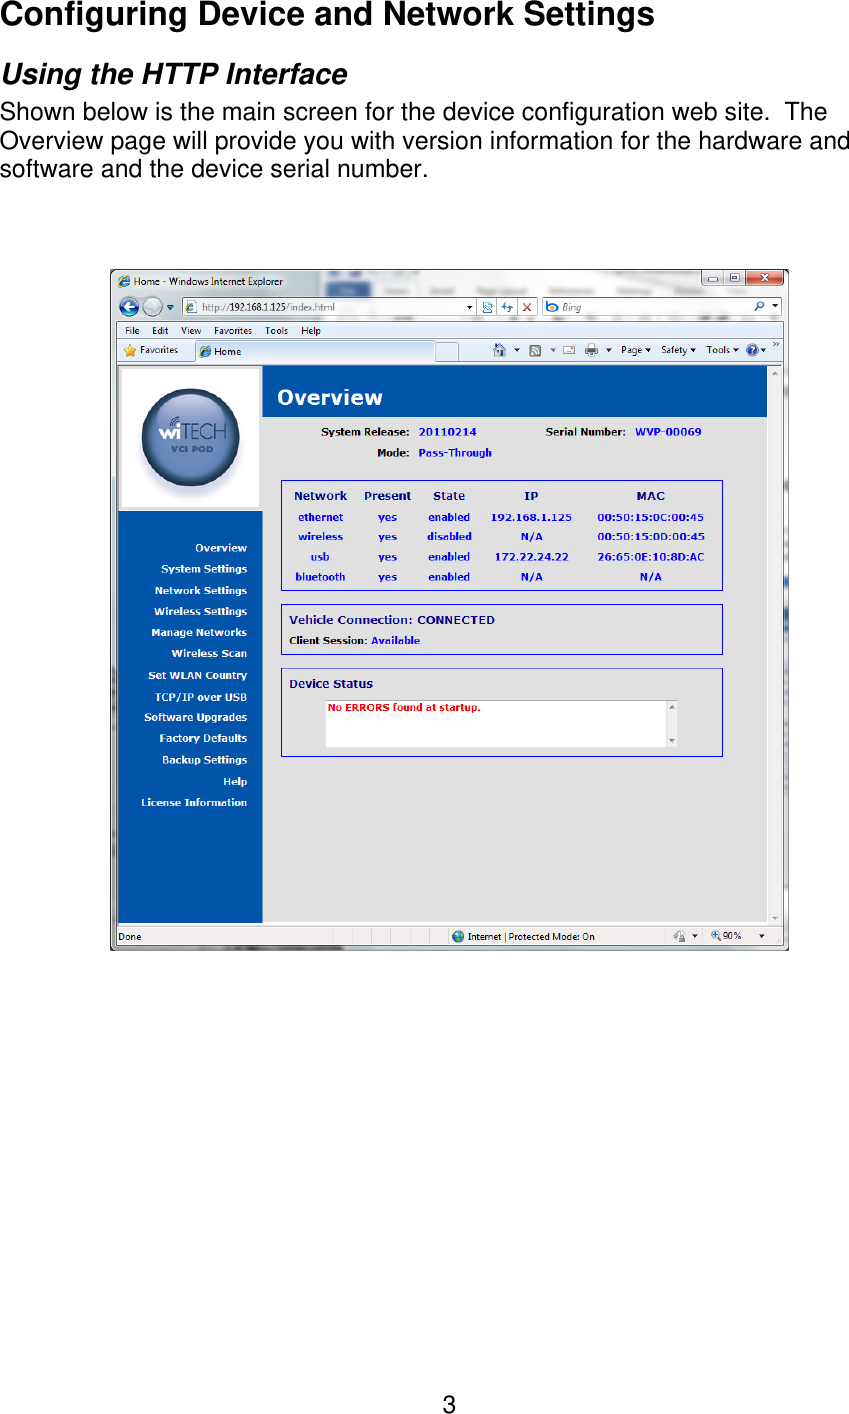   3Configuring Device and Network Settings Using the HTTP Interface Shown below is the main screen for the device configuration web site.  The Overview page will provide you with version information for the hardware and software and the device serial number.     